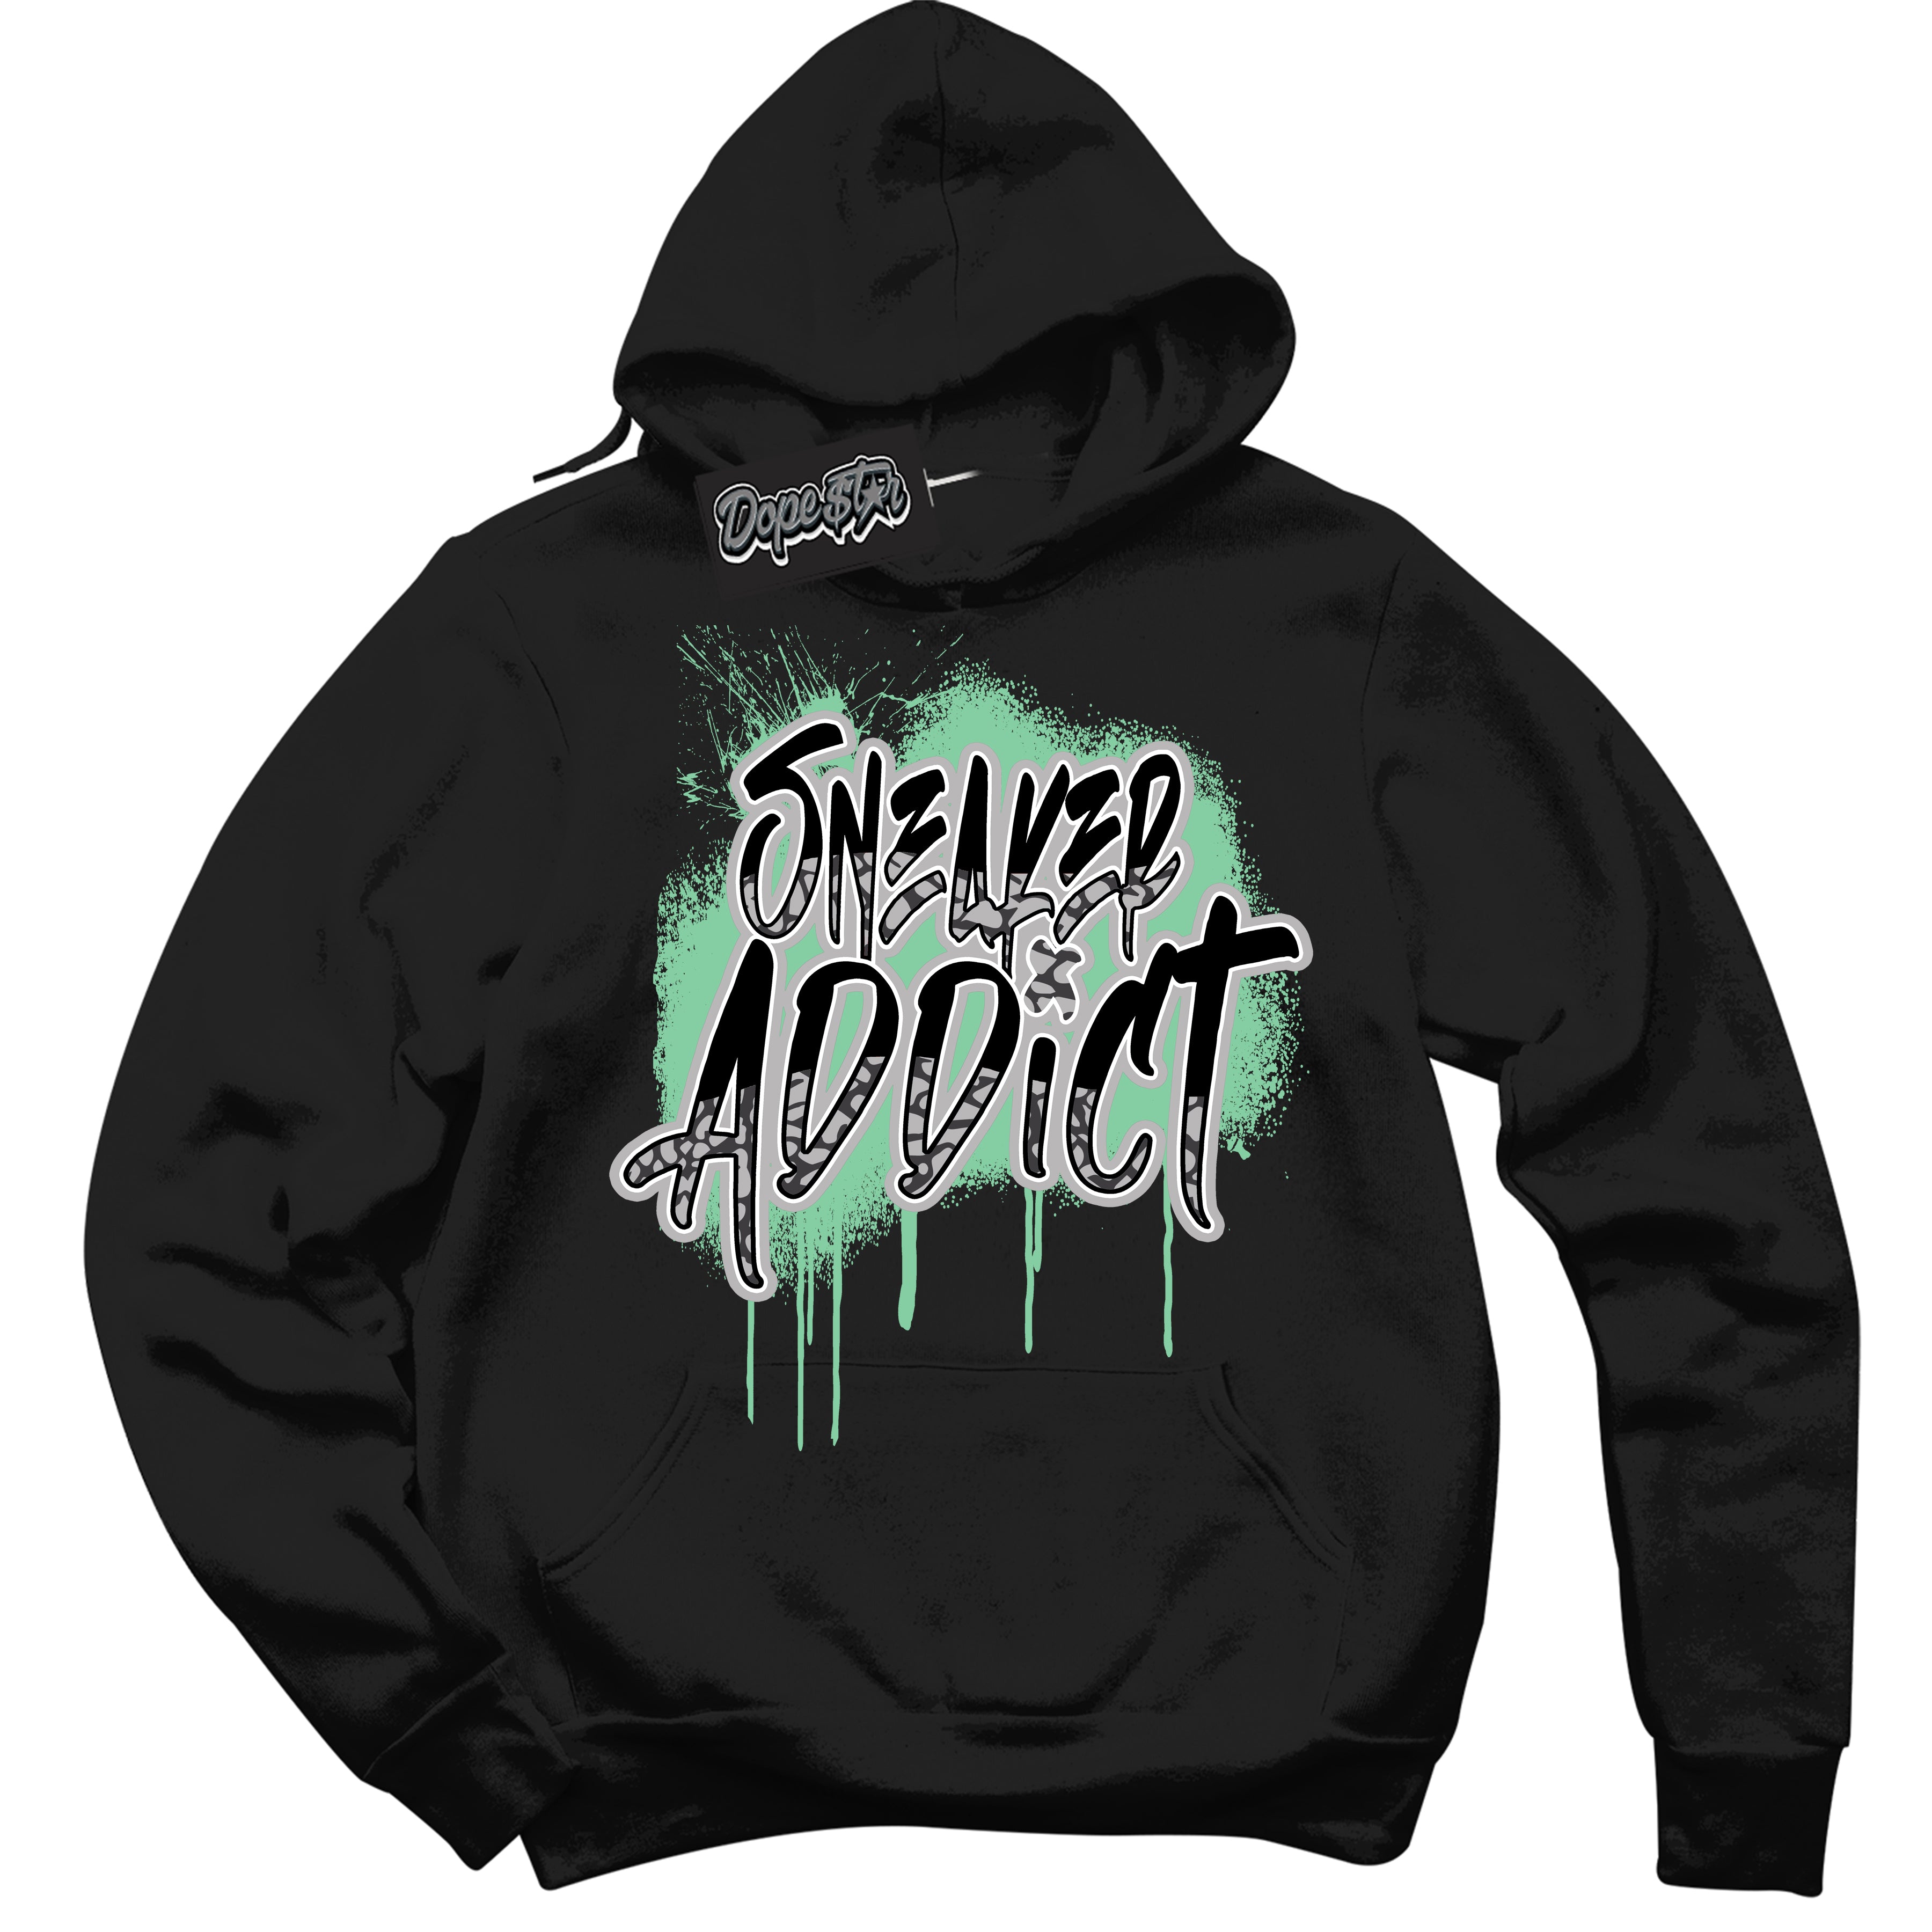 Cool Black Graphic DopeStar Hoodie with “ Sneaker Addict “ print, that perfectly matches Green Glow 3S sneakers